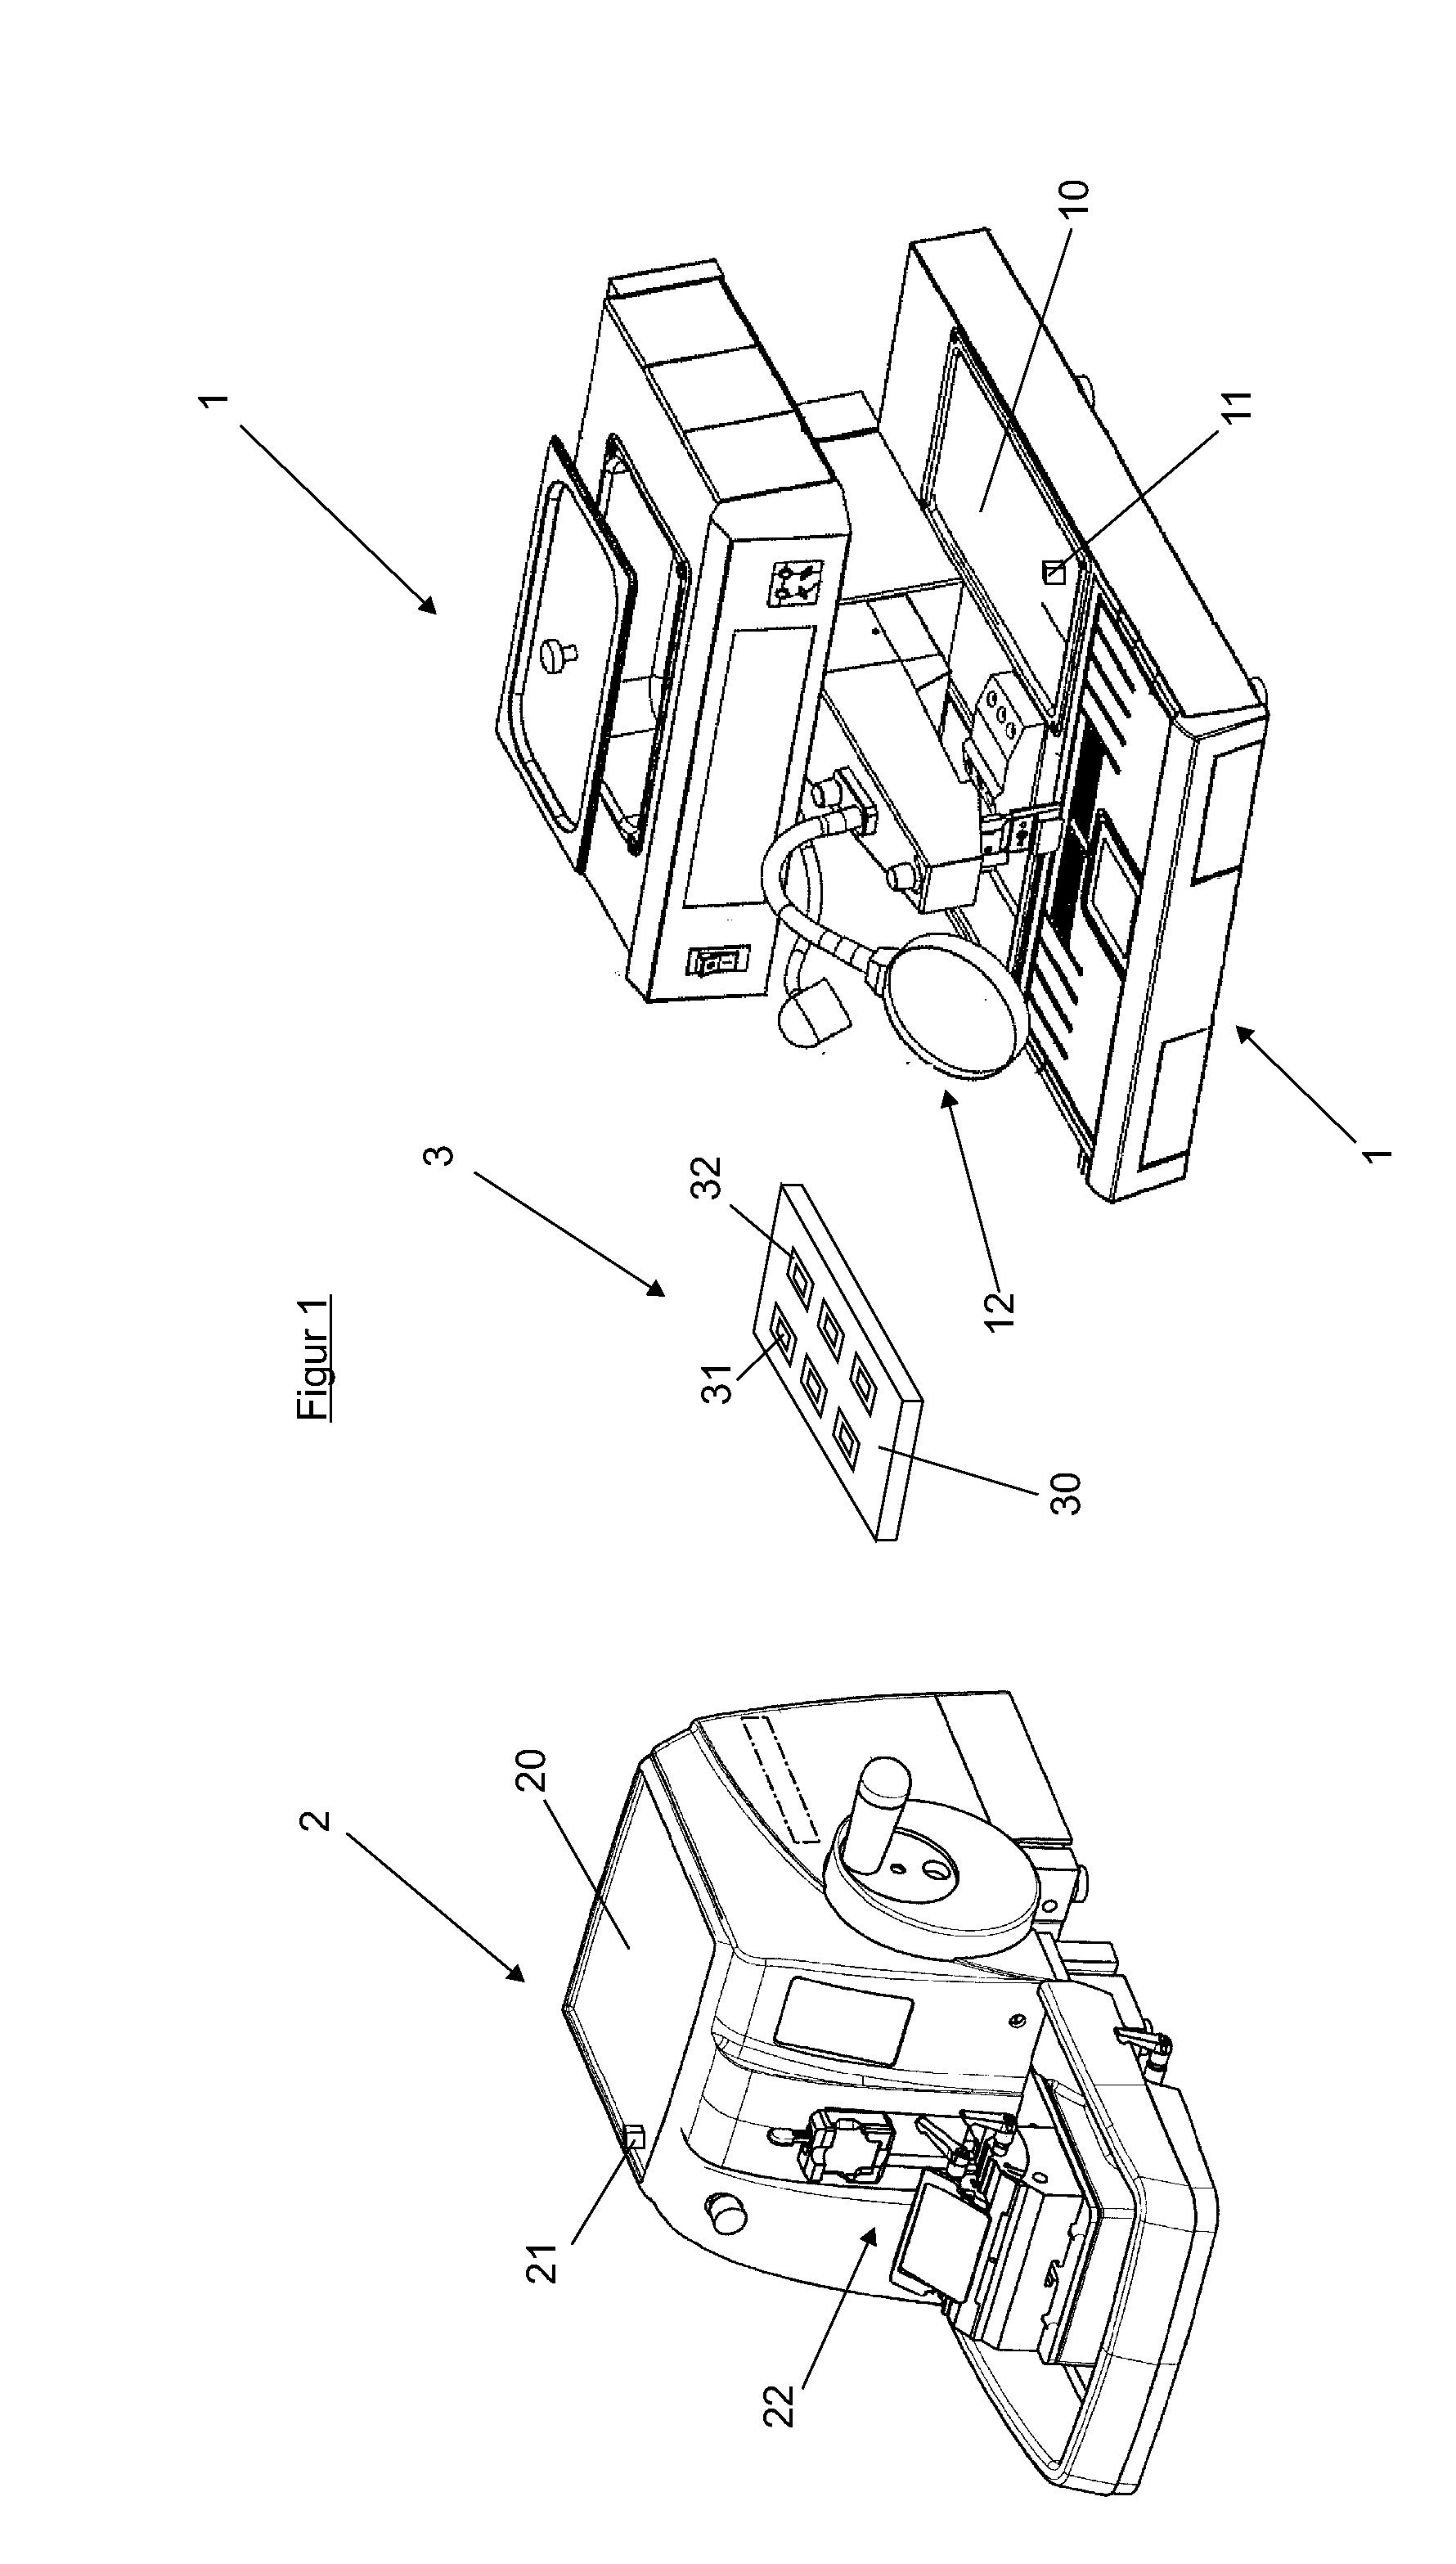 Portable device for transporting a histological sample